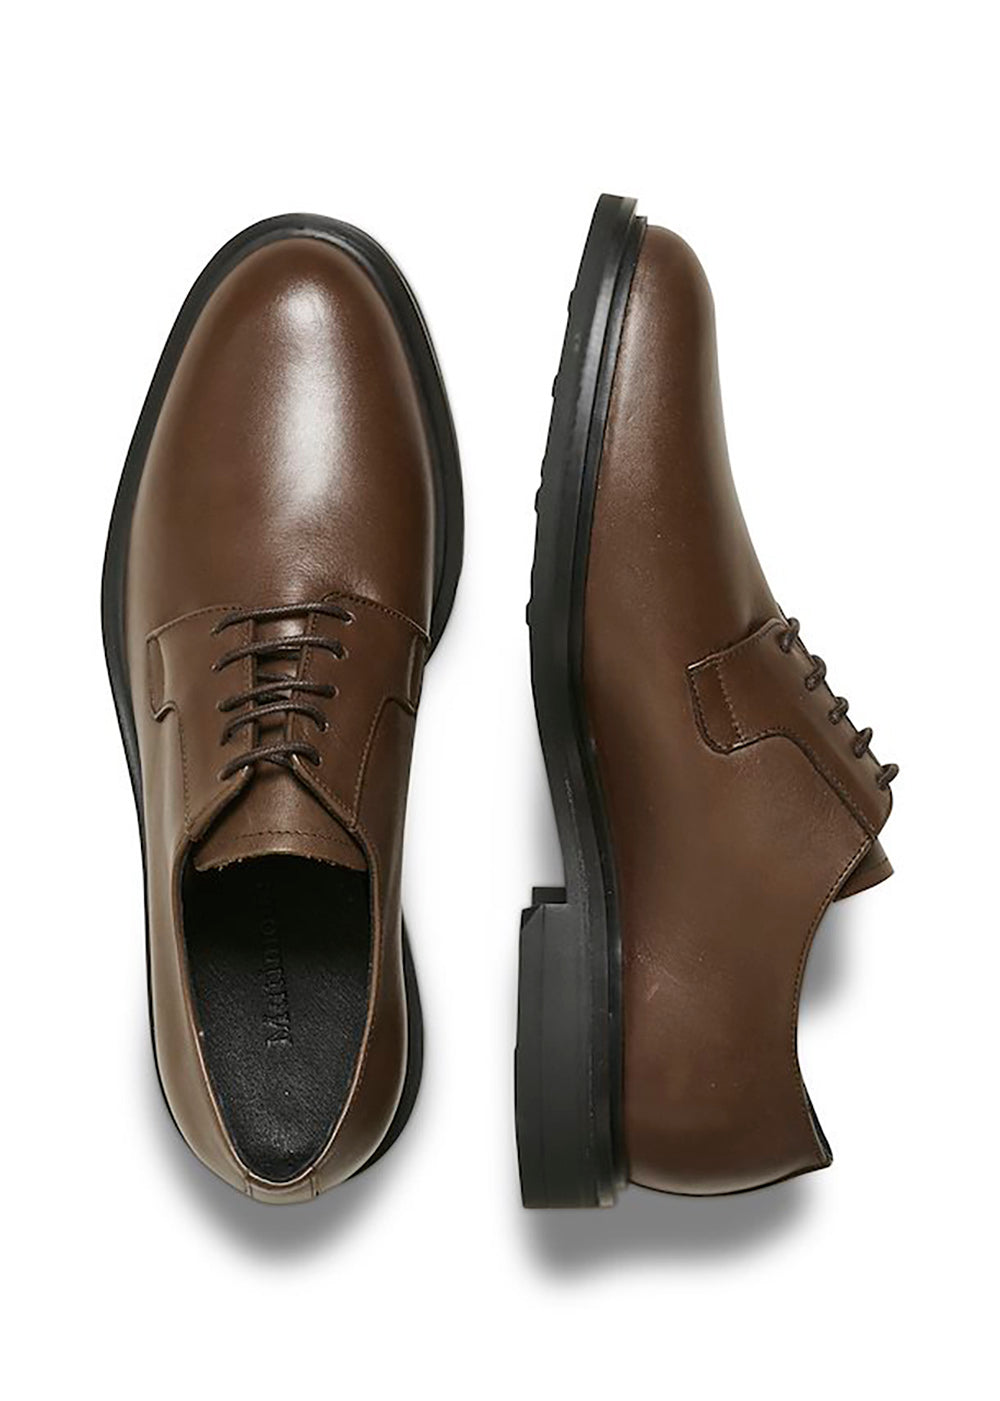 Fitch Smooth Derby Shoes - After Dark - Matinique Canada - Danali - 30206697